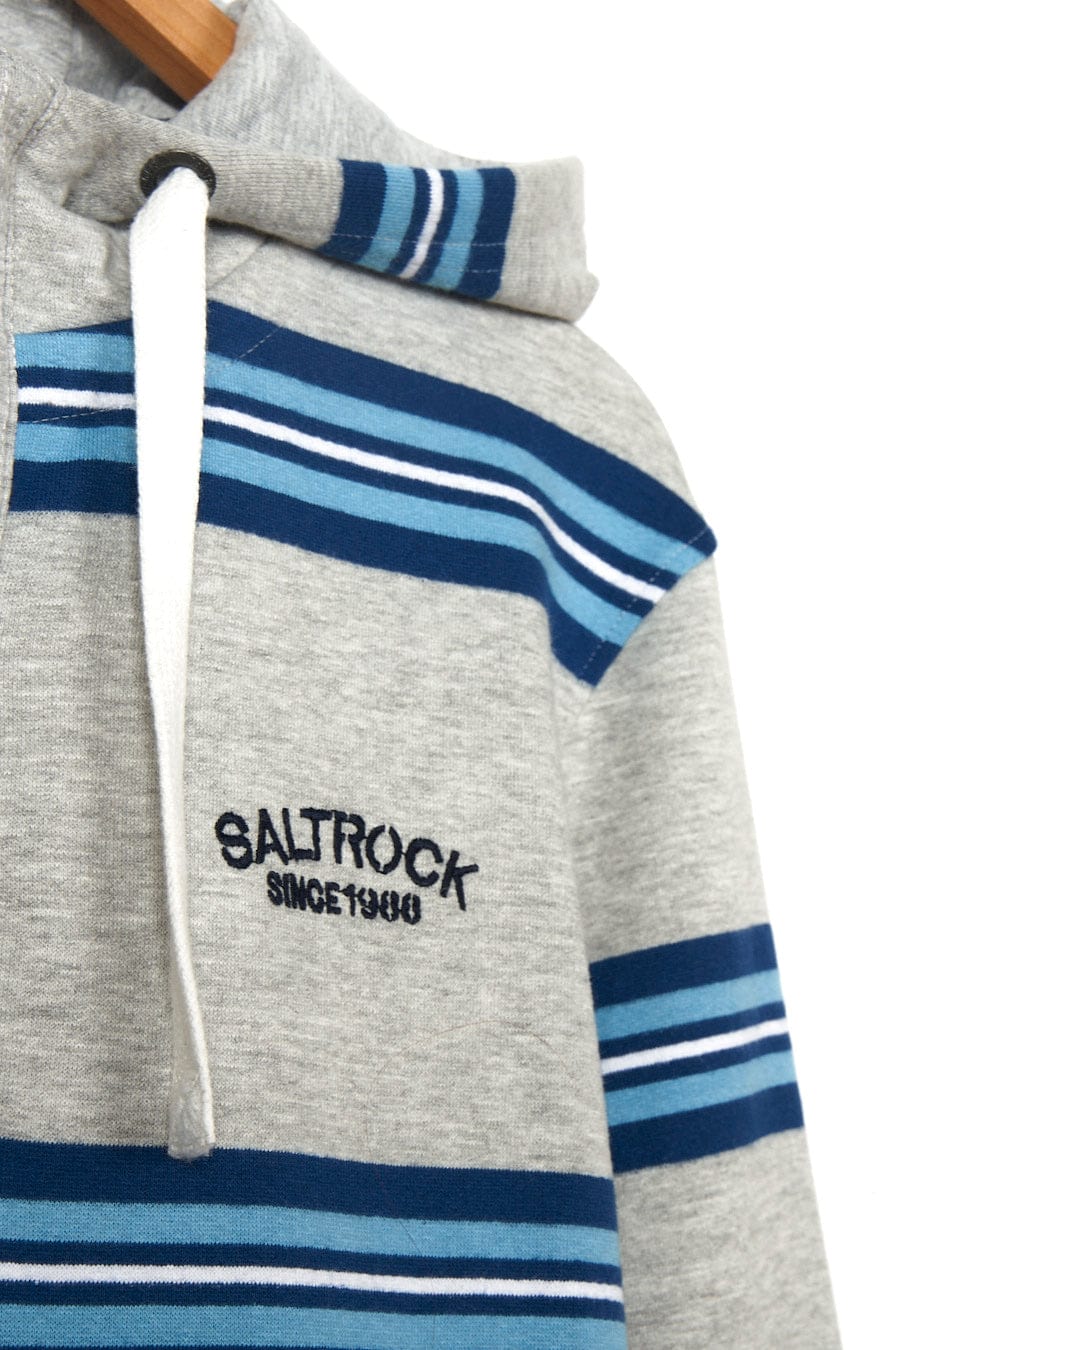 A grey and blue striped hoodie with the word Saltrock on it.